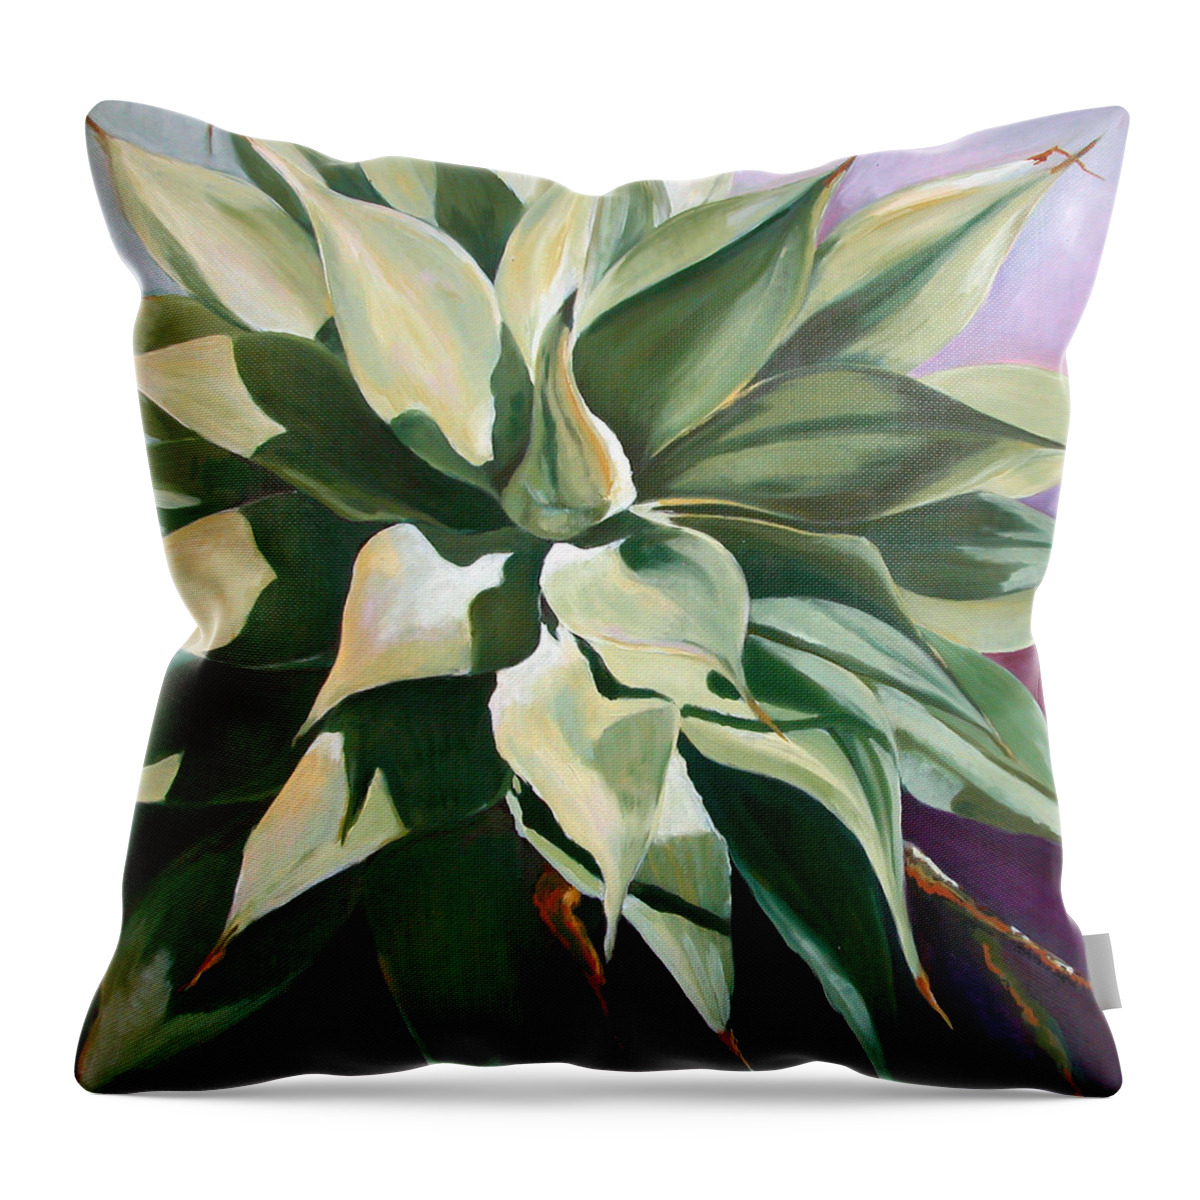 Agave Plant Throw Pillow featuring the painting Agave 1 by Synnove Pettersen